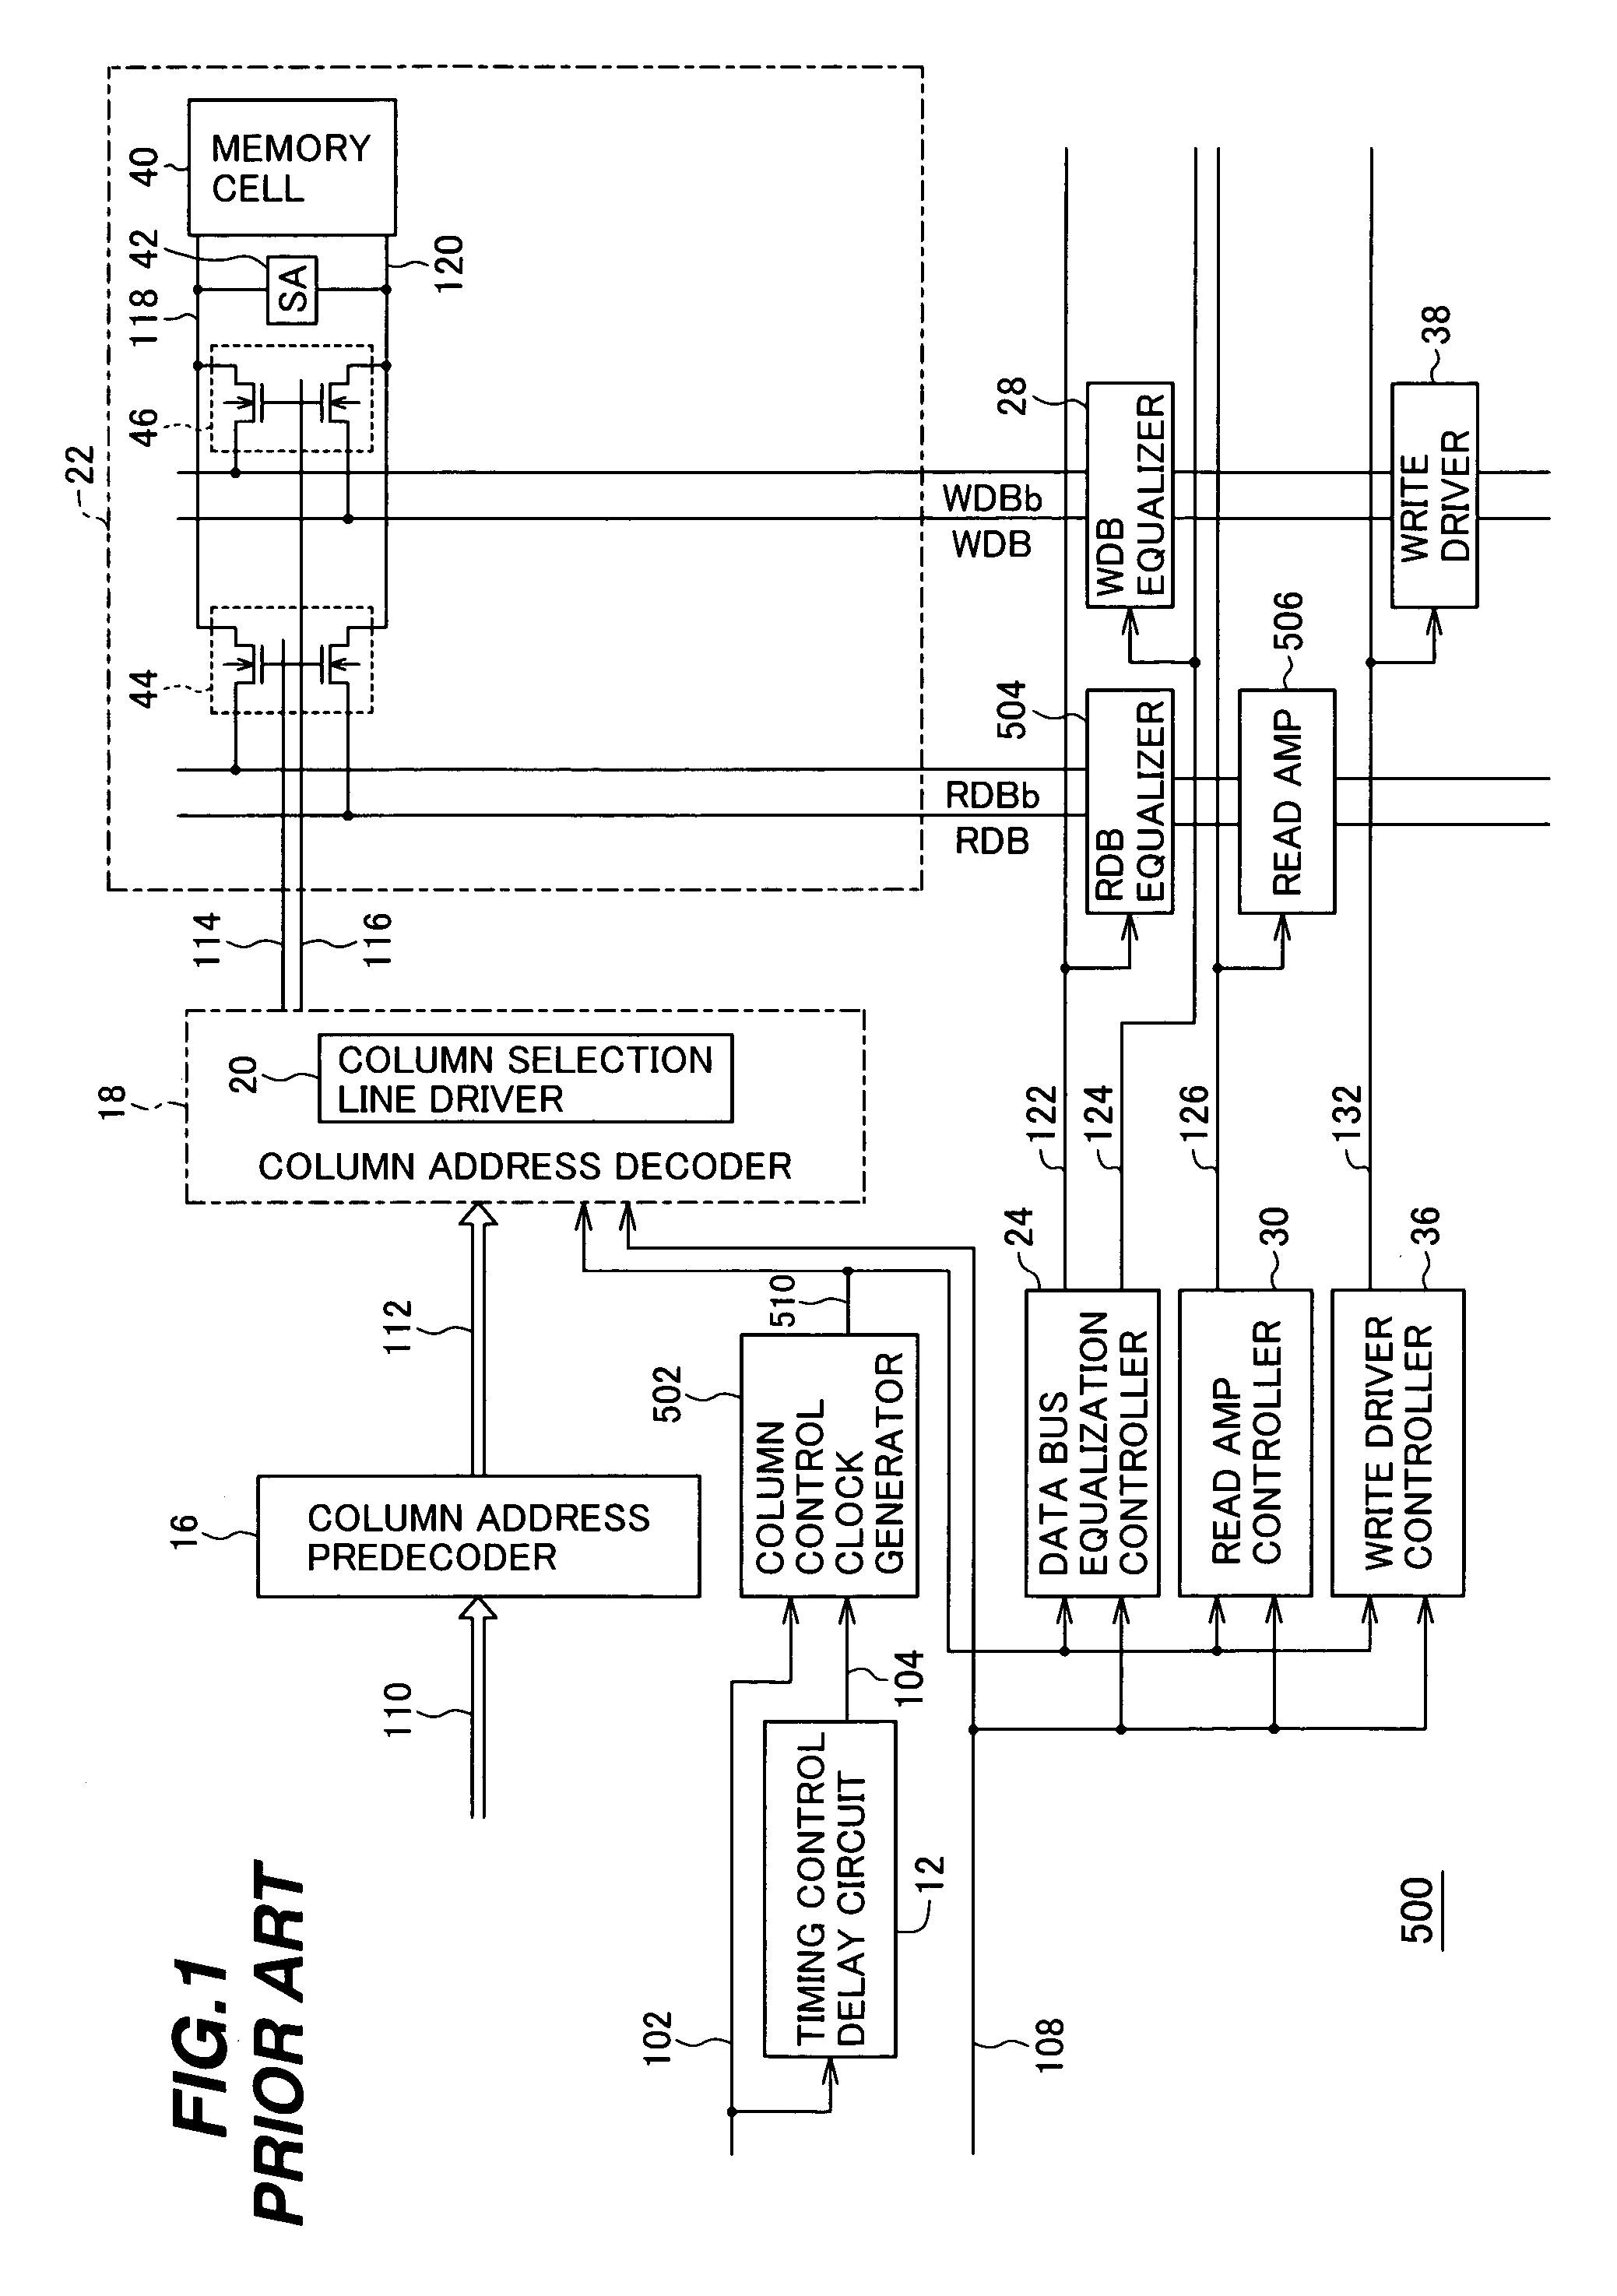 High-speed synchronous memory device